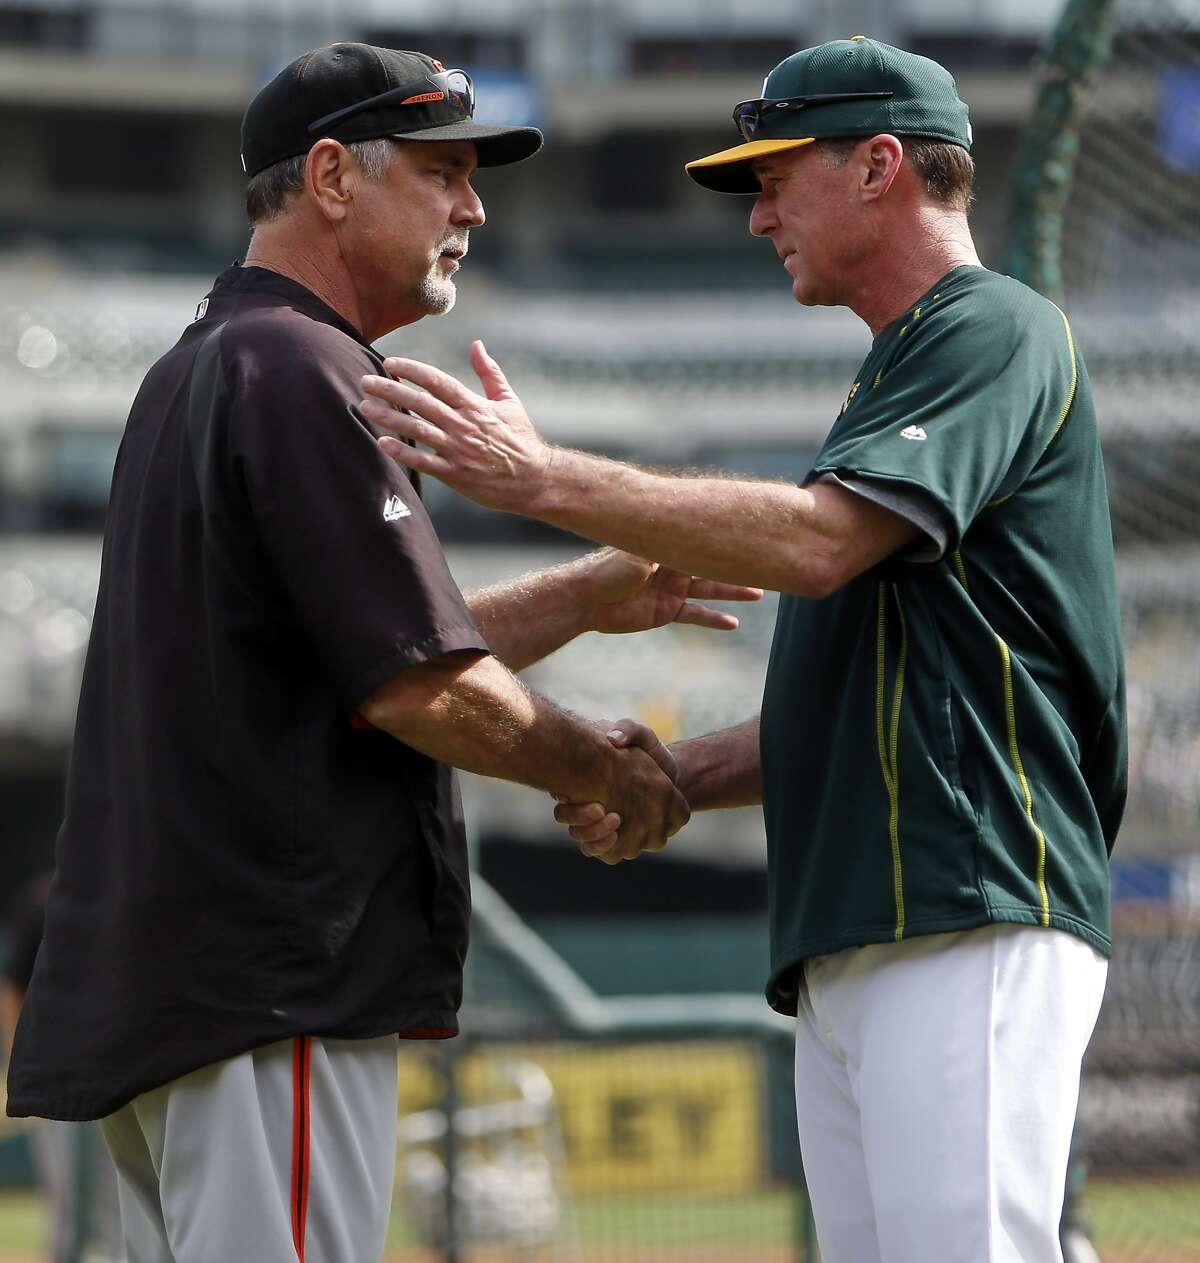 San Francisco Giants' manager Bruce Bochy greets Oakland A's manager Bob Melvin before MLB game at O.co Coliseum in Oakland, Calif., on Sunday, September 27, 2015.